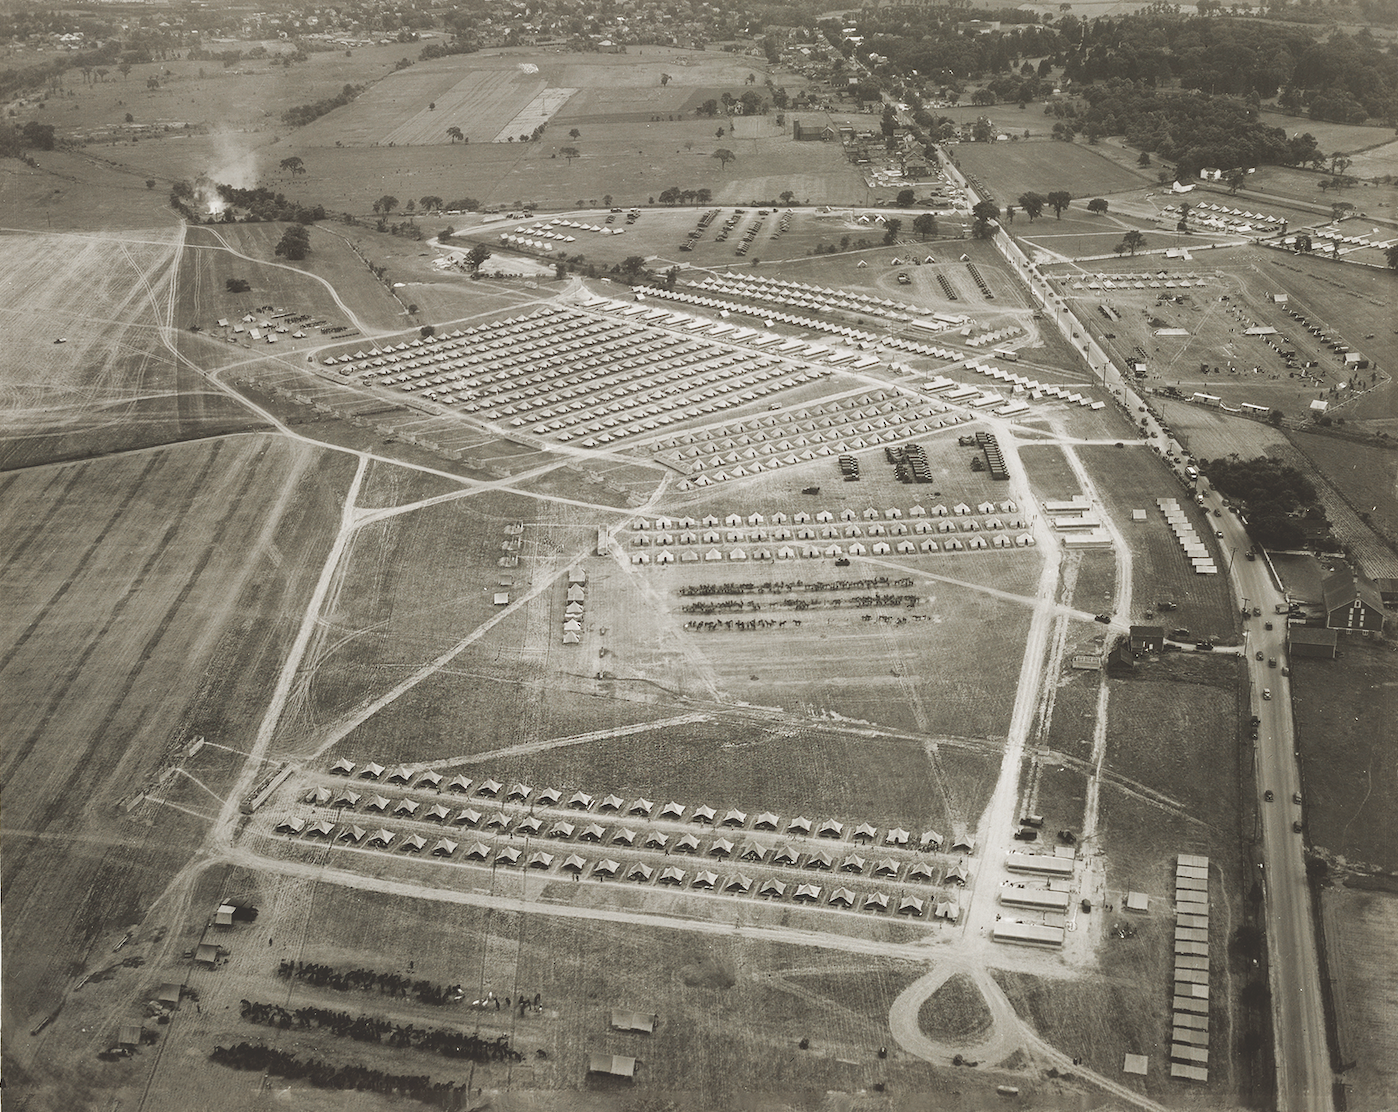 A U.S. Army encampment at Gettysburg for the 75th anniversary of the battle in 1938. (National Archives)